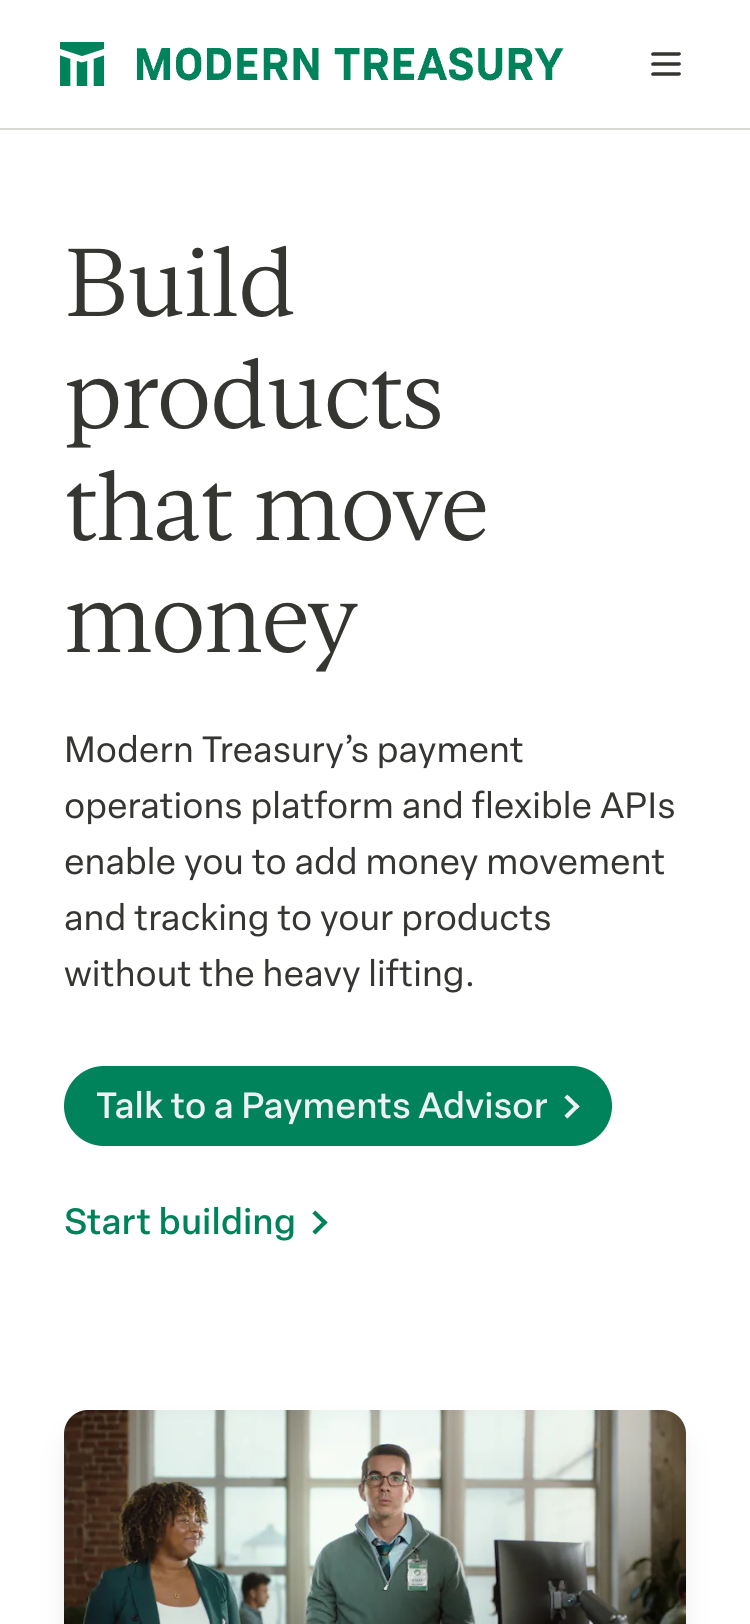 Mobile screenshot of the Modern Treasury home page. The header contains the Modern Treasury logo and a menu button. The hero section contains an intro paragraph and buttons inviting the user to 'Talk to a Payments Advisor' or 'Start building'.